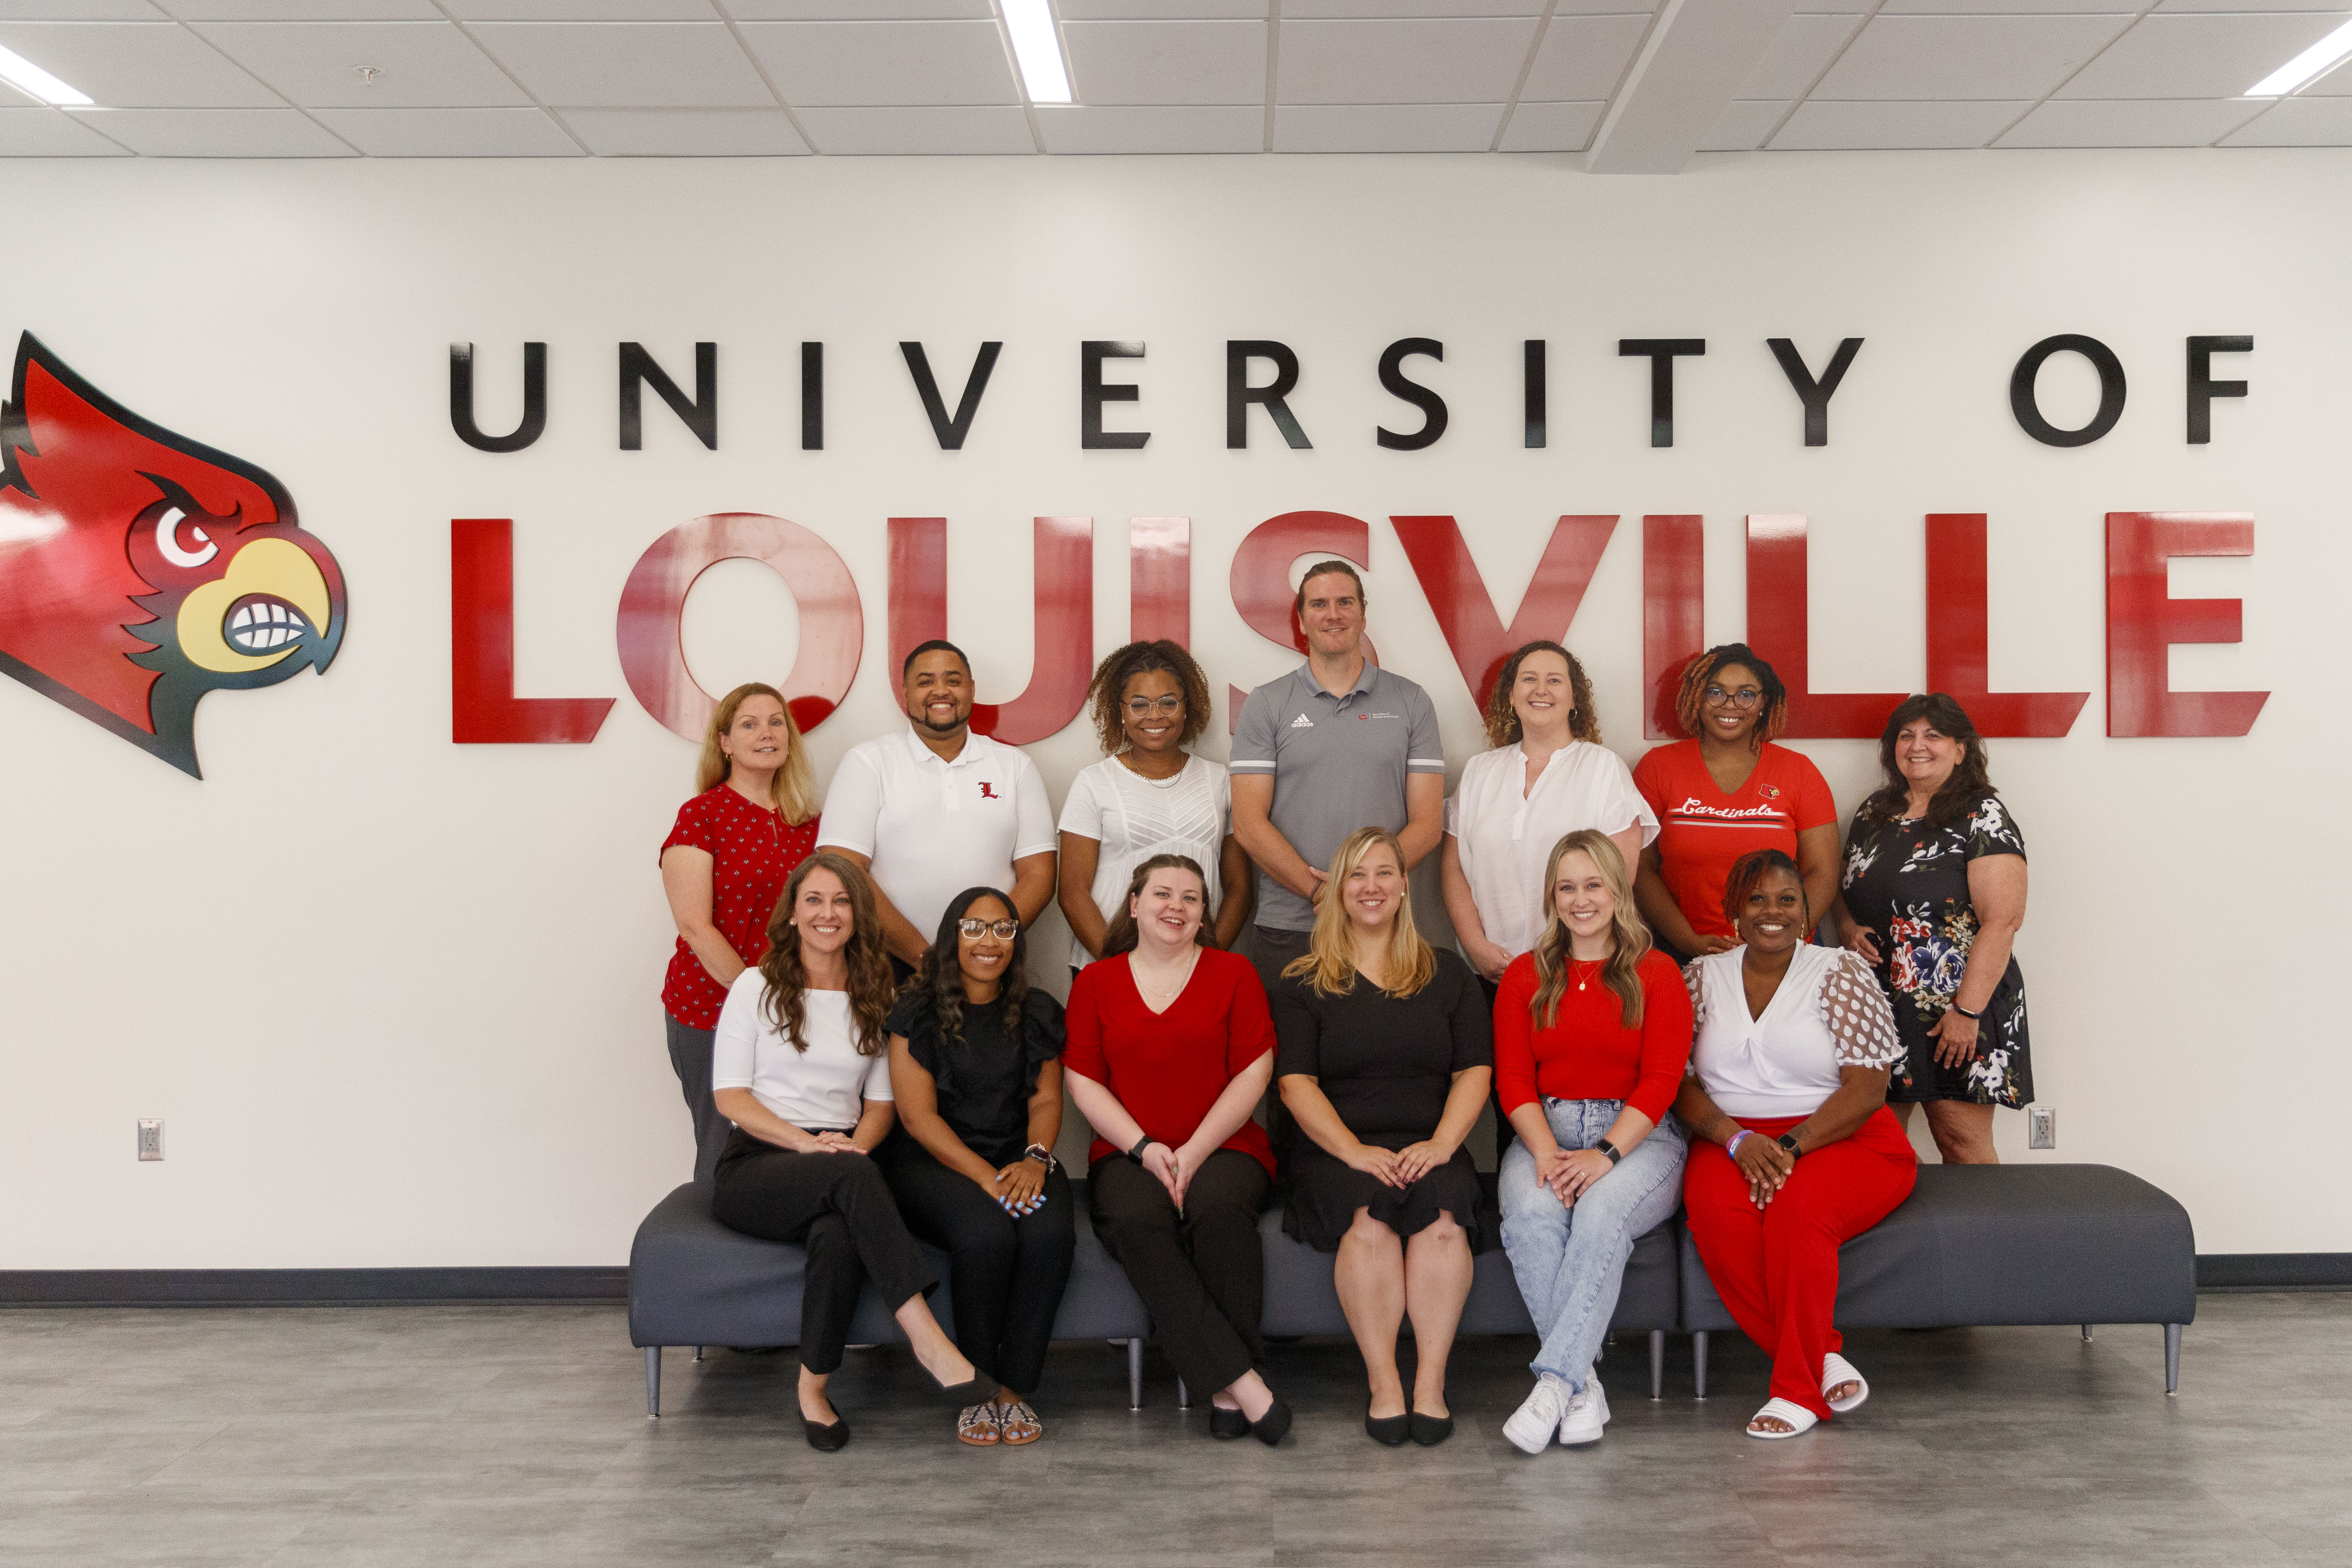 group picture of the Student Involvement staff posing in front of a University of Louisville sign